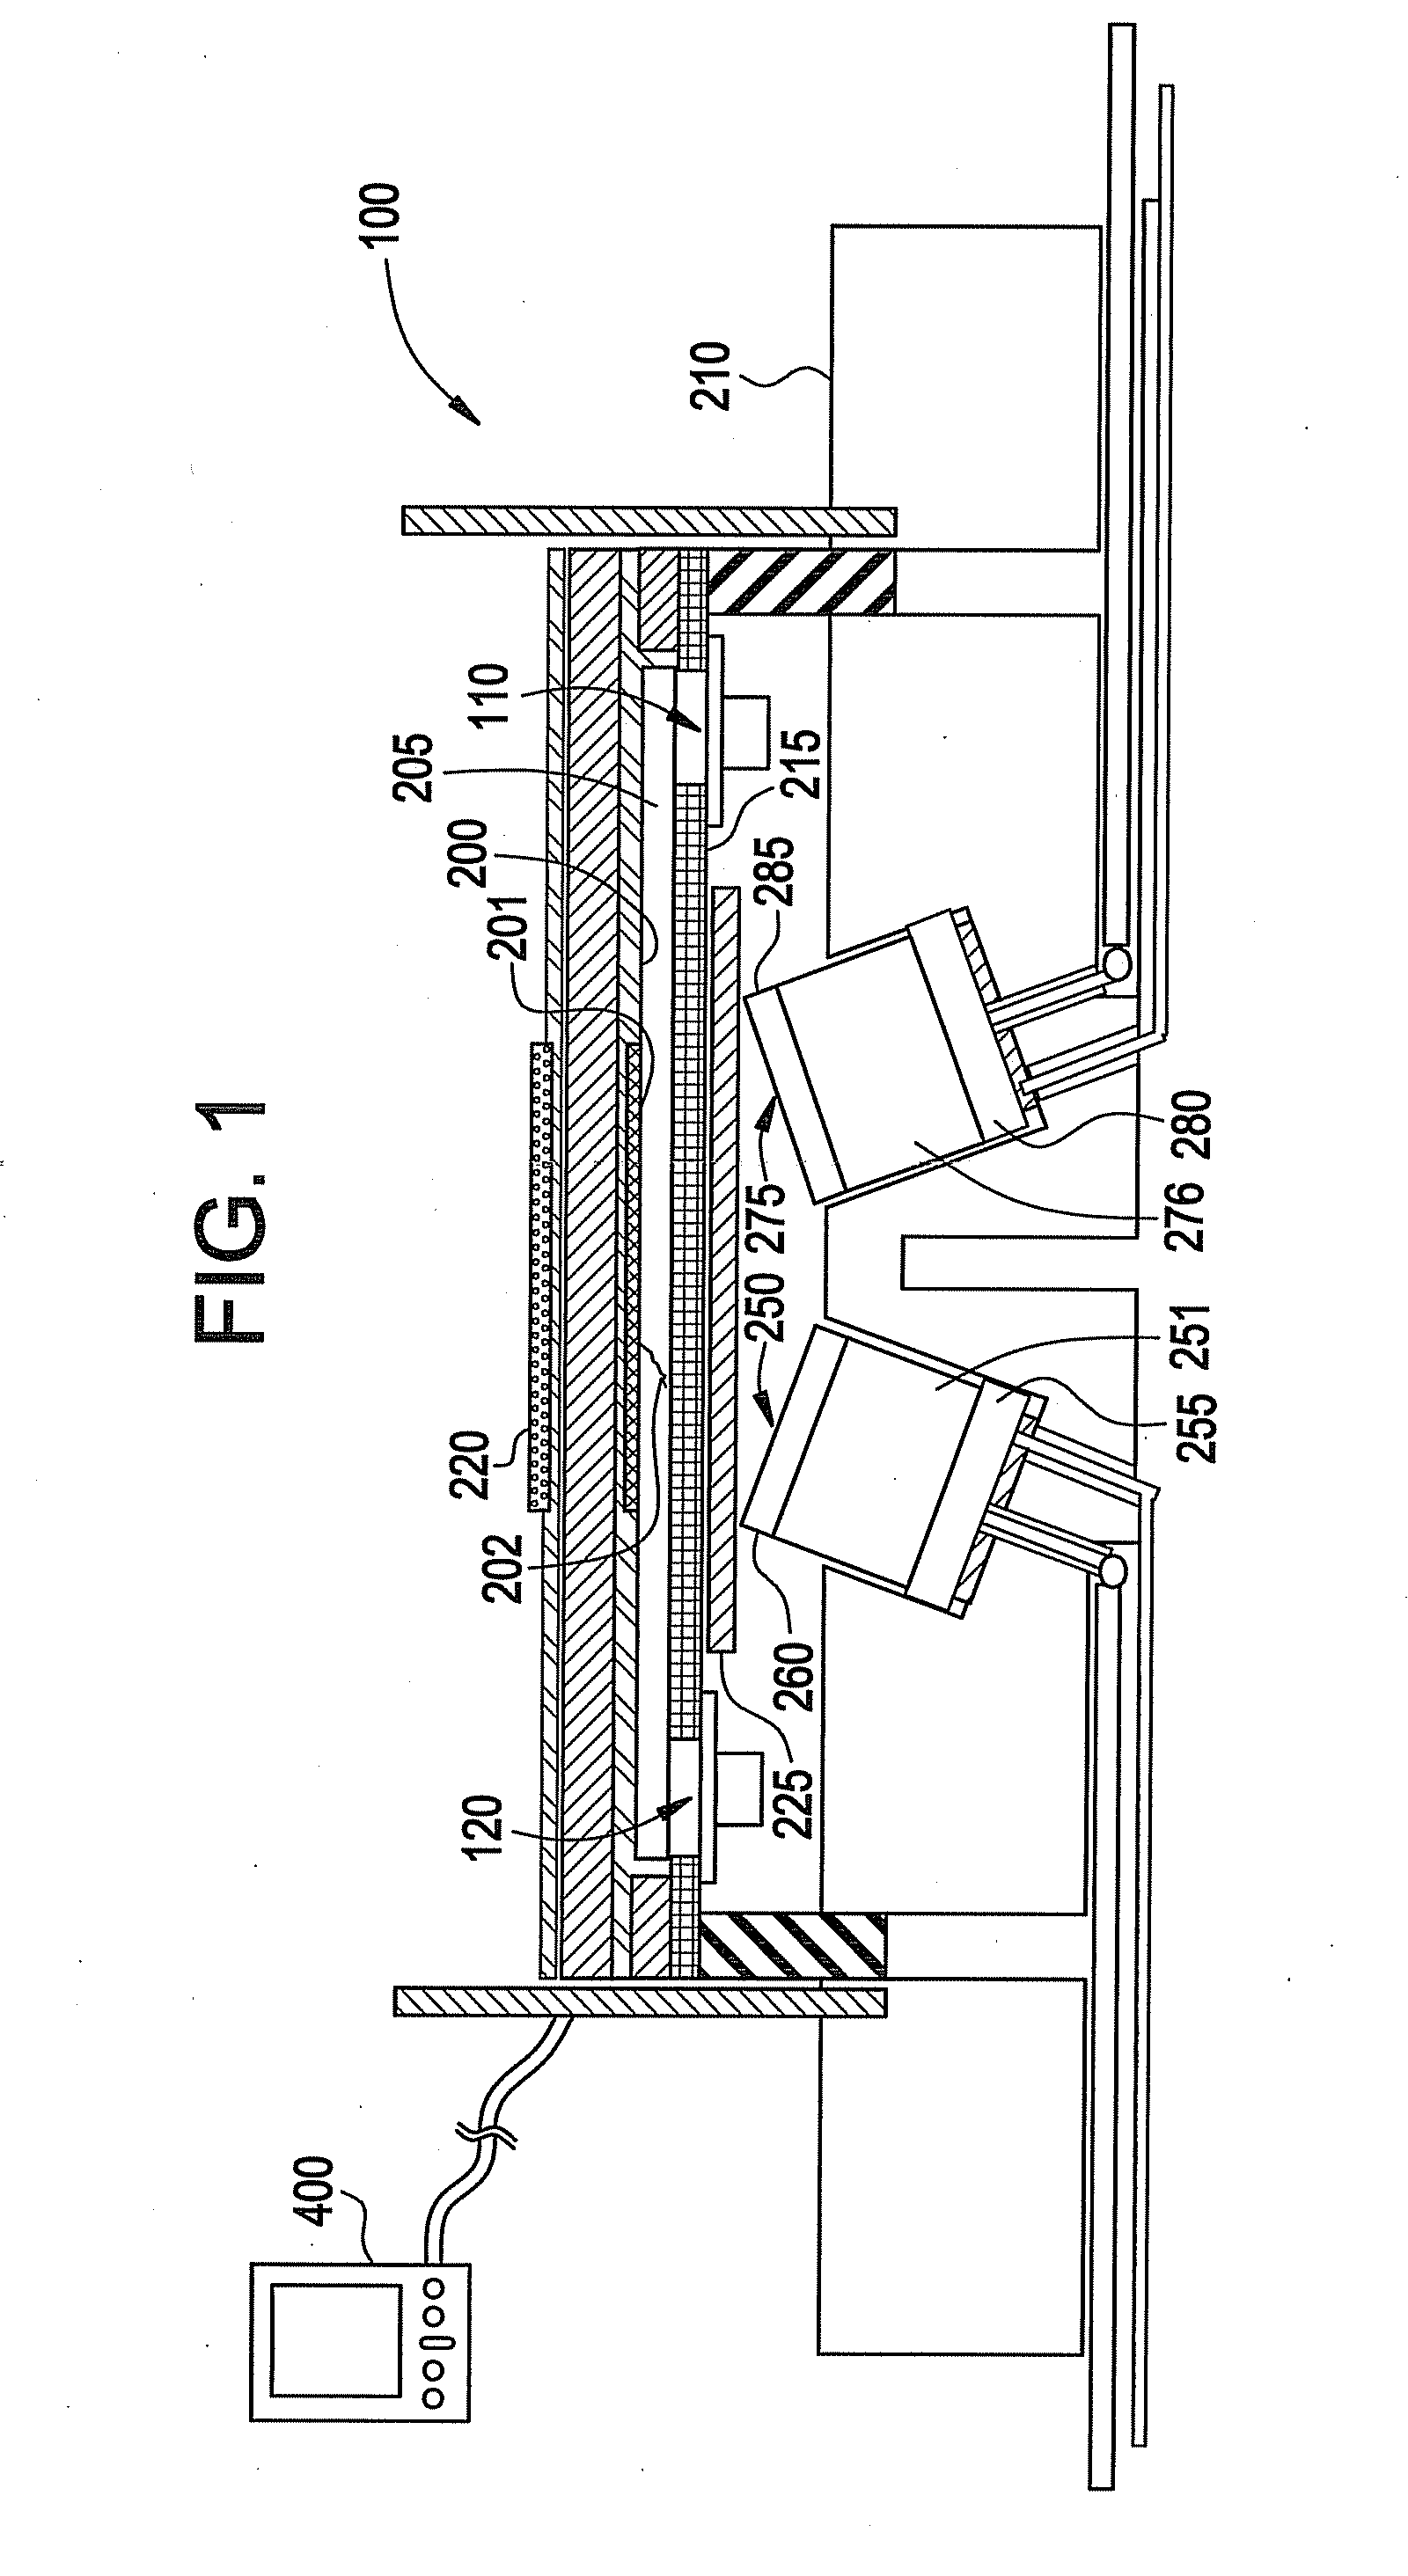 Portable light generation and detection system